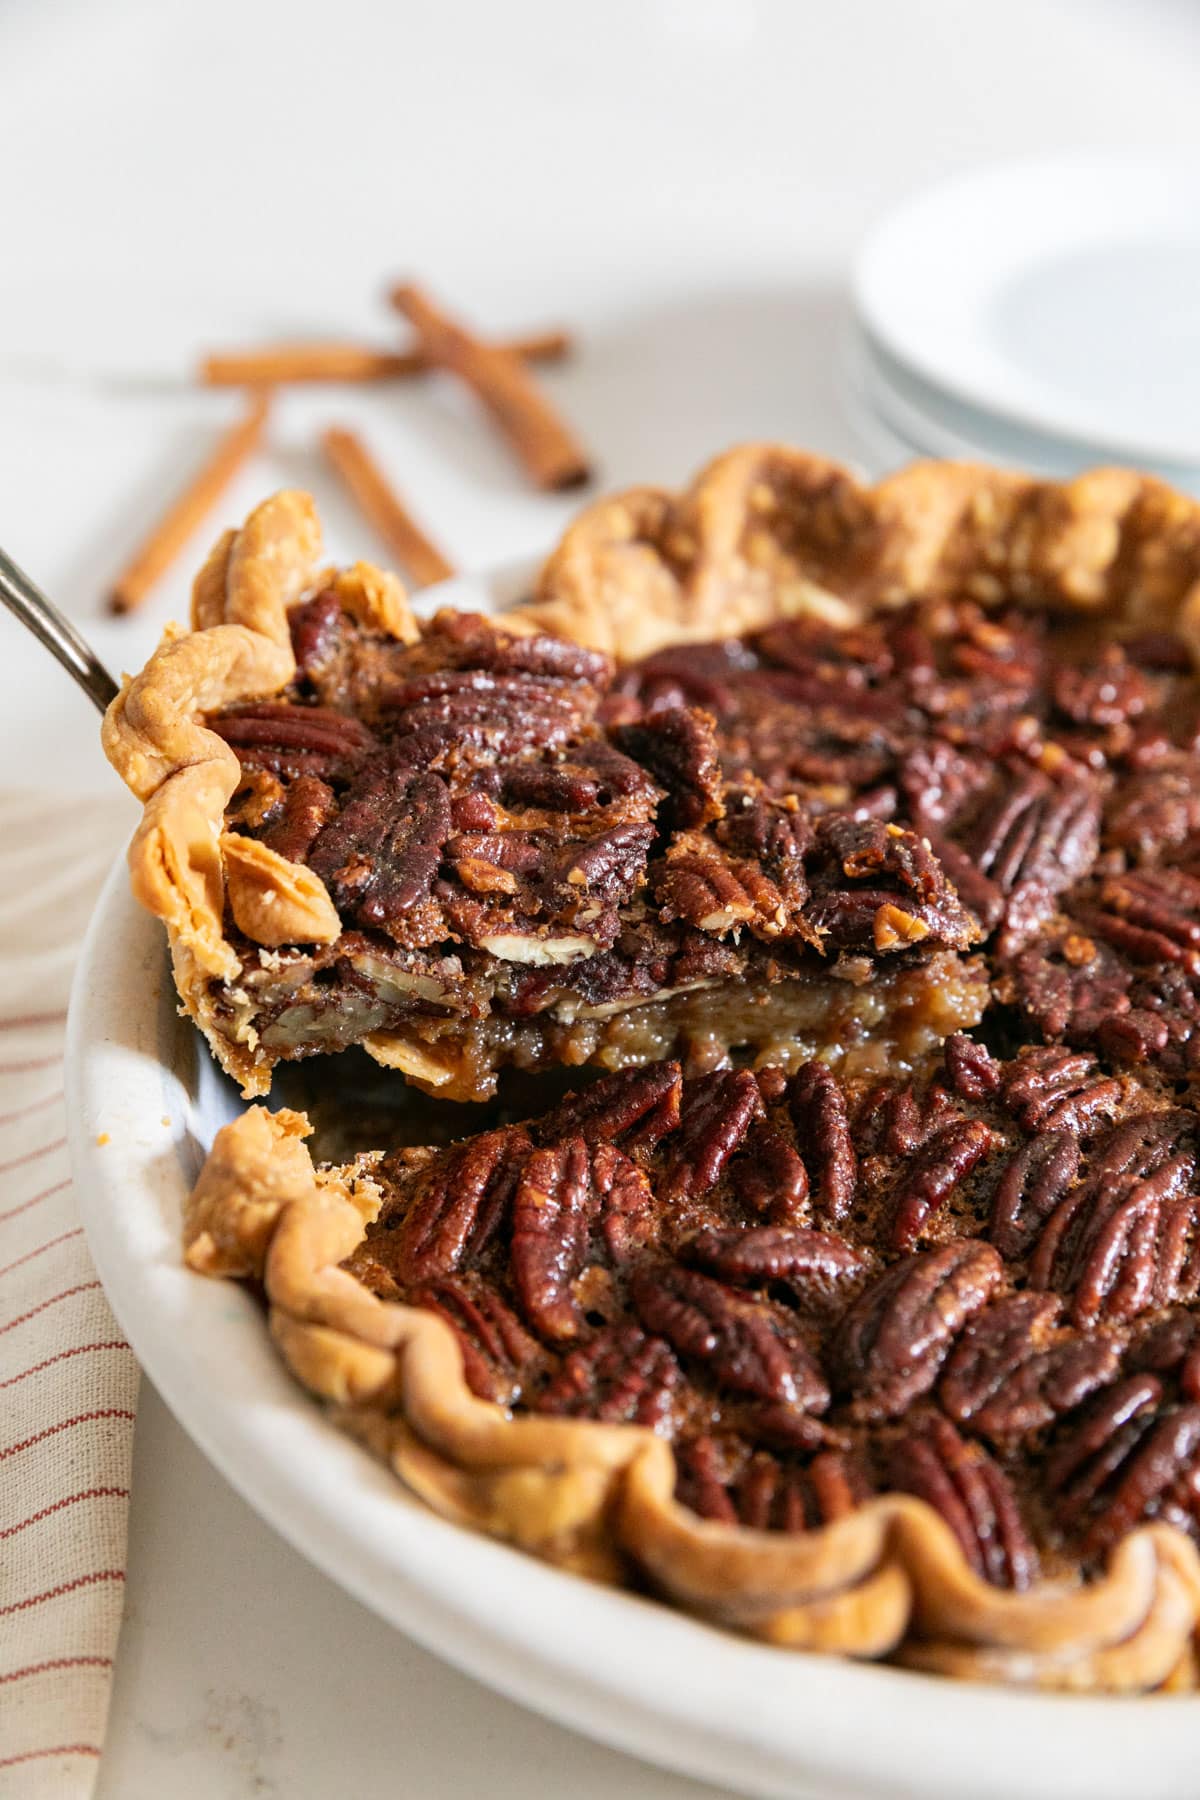 A slice of pecan pie being pulled from the pie with plates and cinnamon sticks in the background.